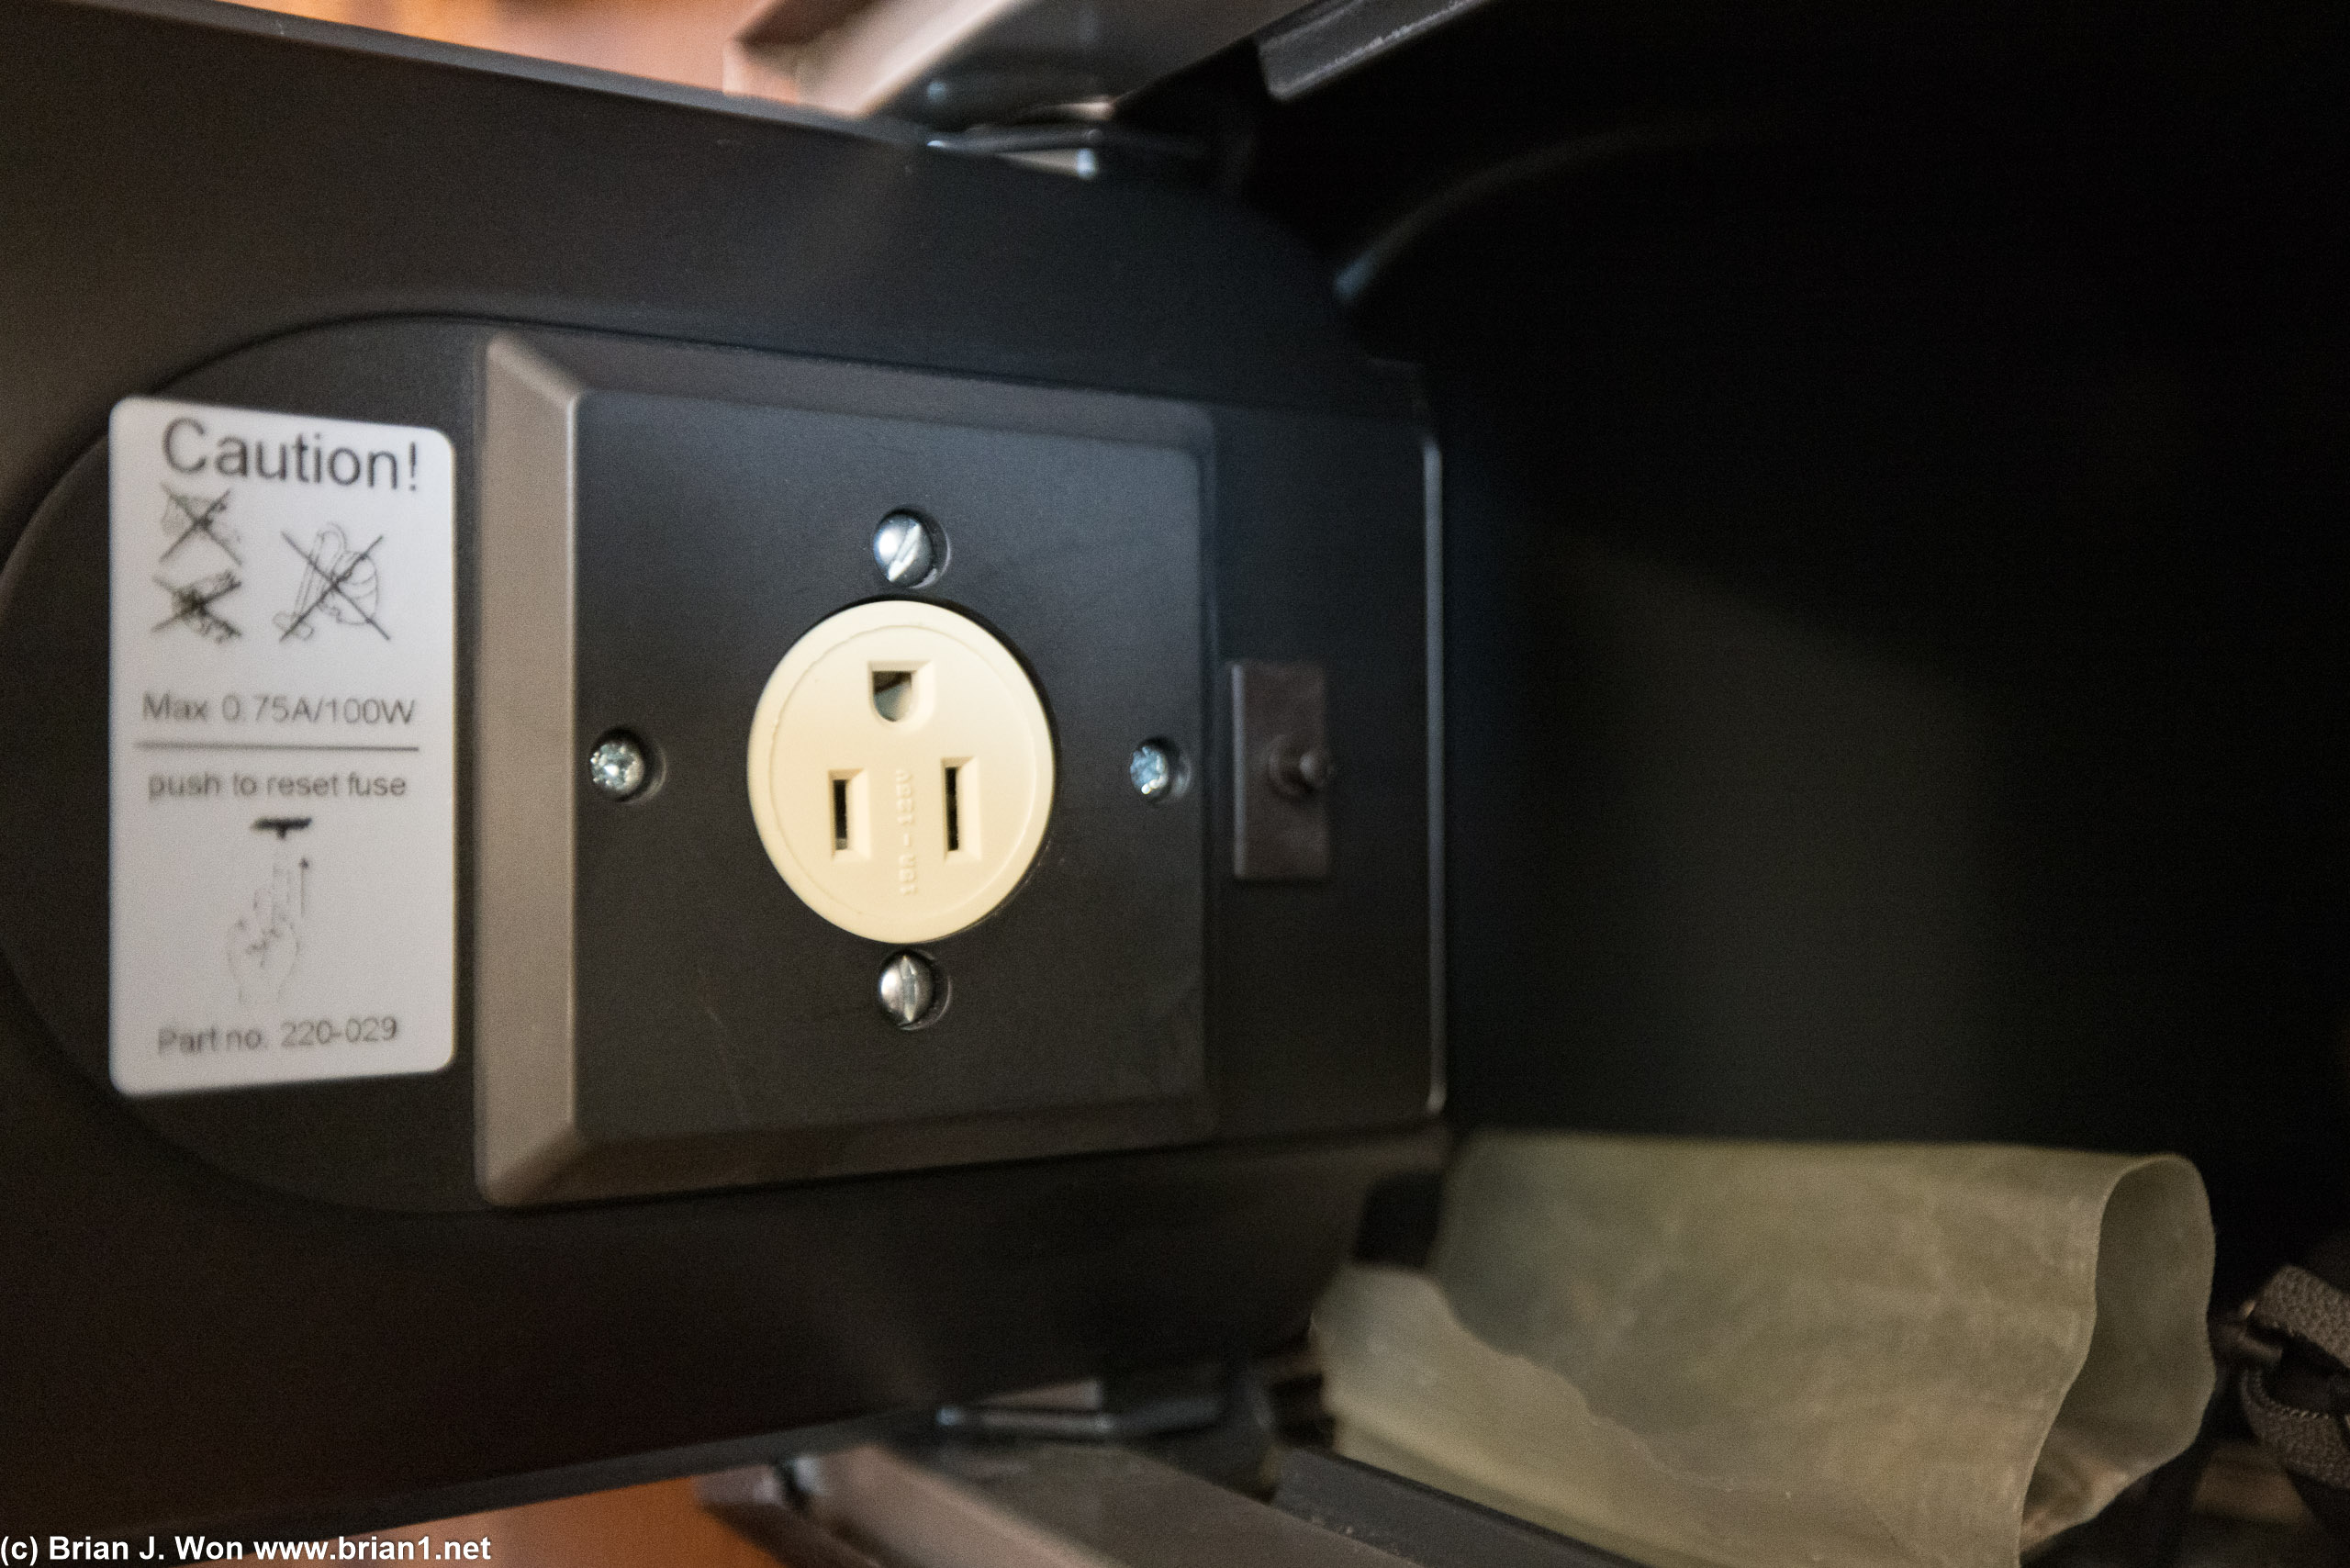 Power outlet inside the safe? Genius!